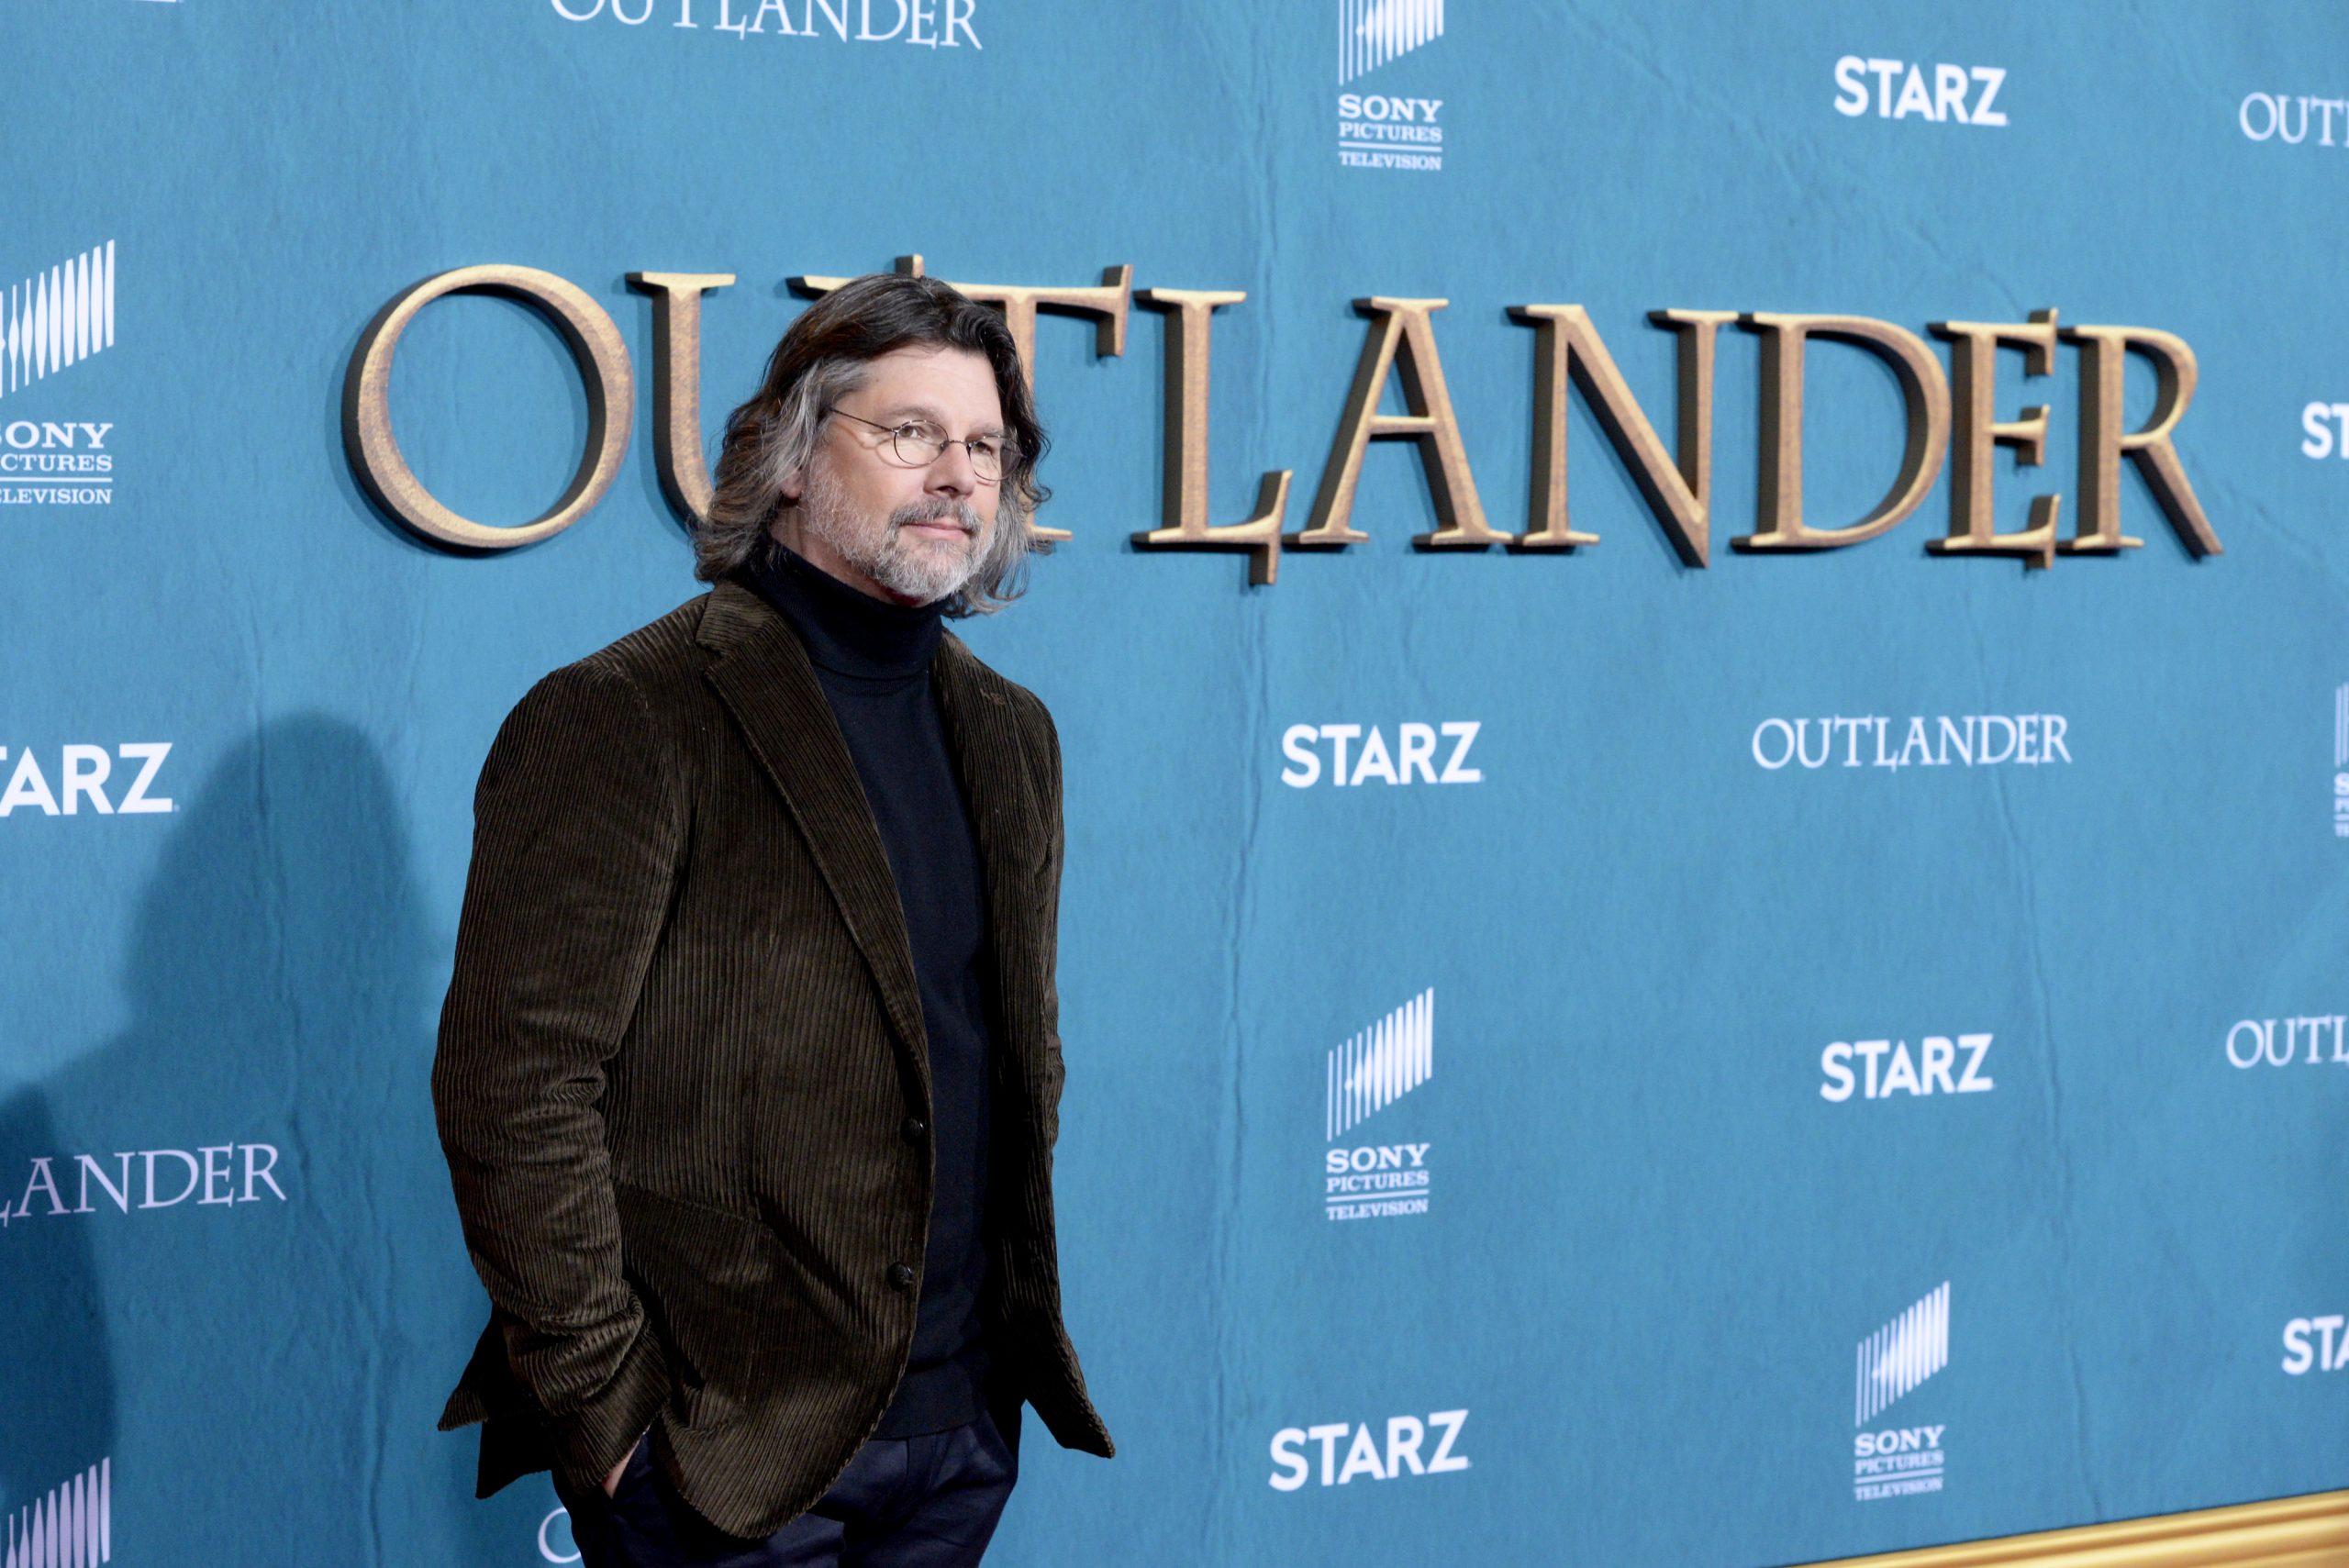 ‘Outlander’ Creator Ronald D. Moore Has a Huge New Disney TV Universe in the Works